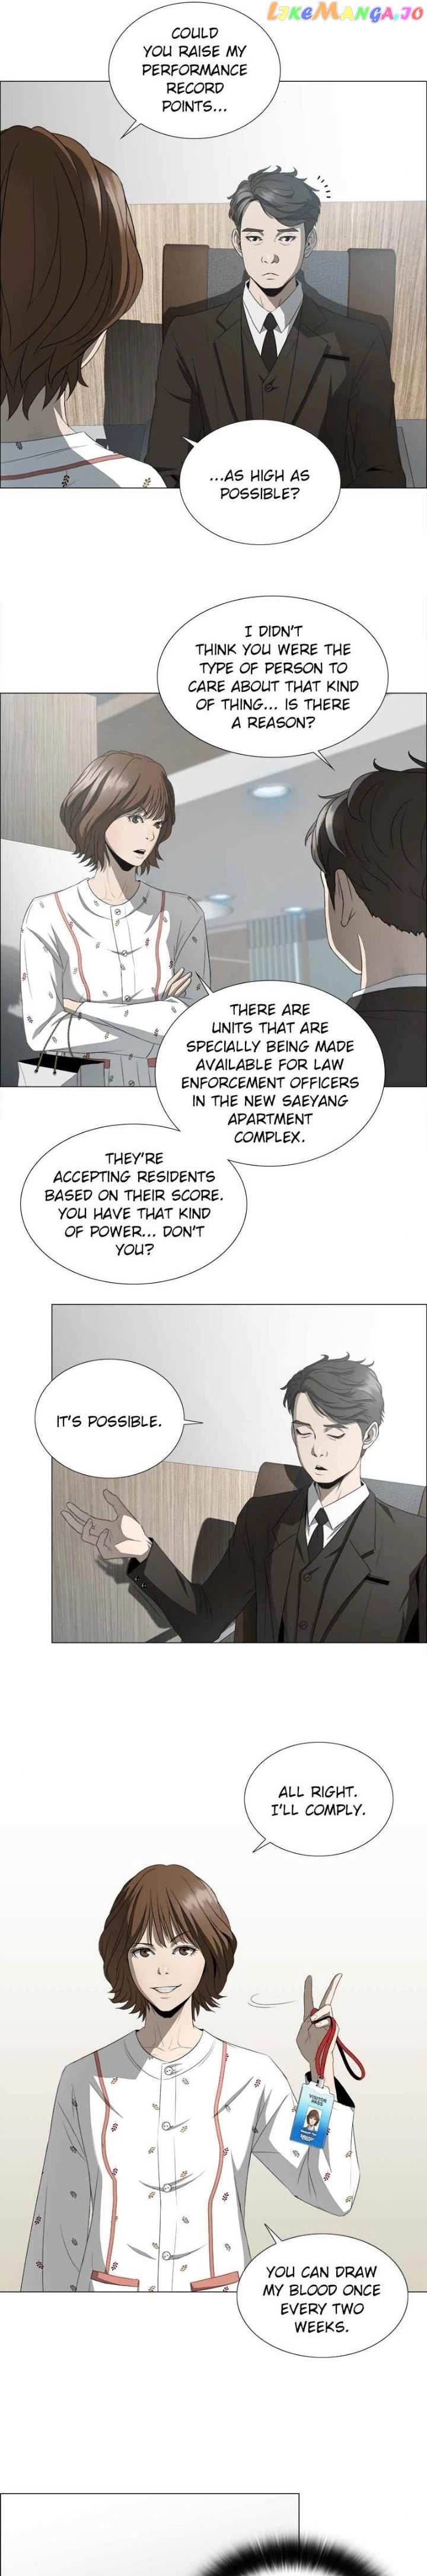 Happiness Happiness_(Official)___Chapter_7 - page 9